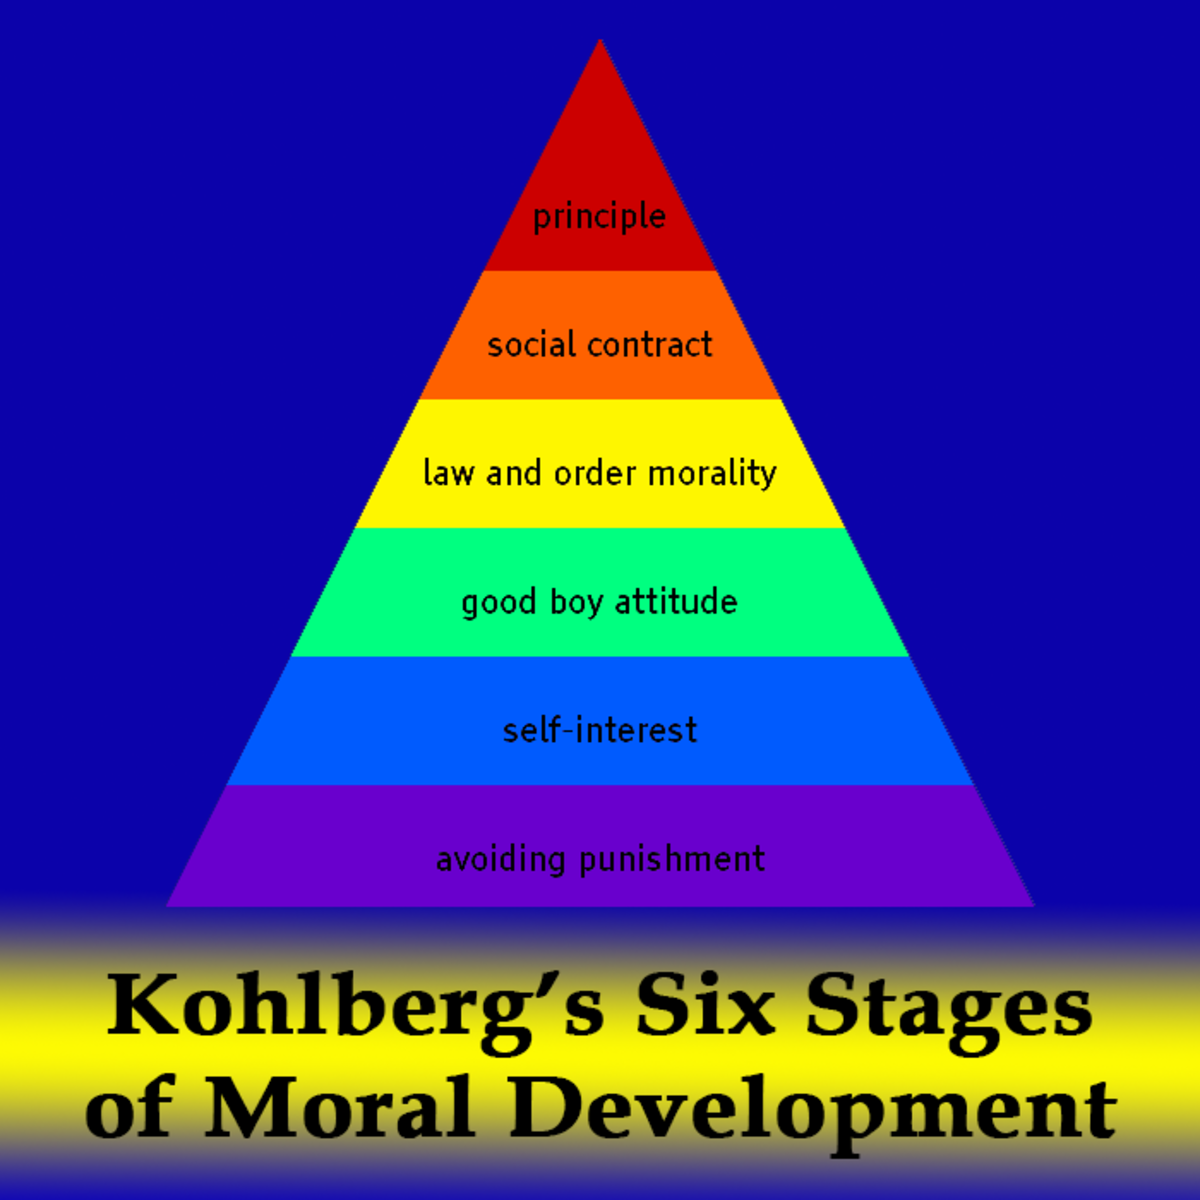 research on moral development in adulthood has shown that